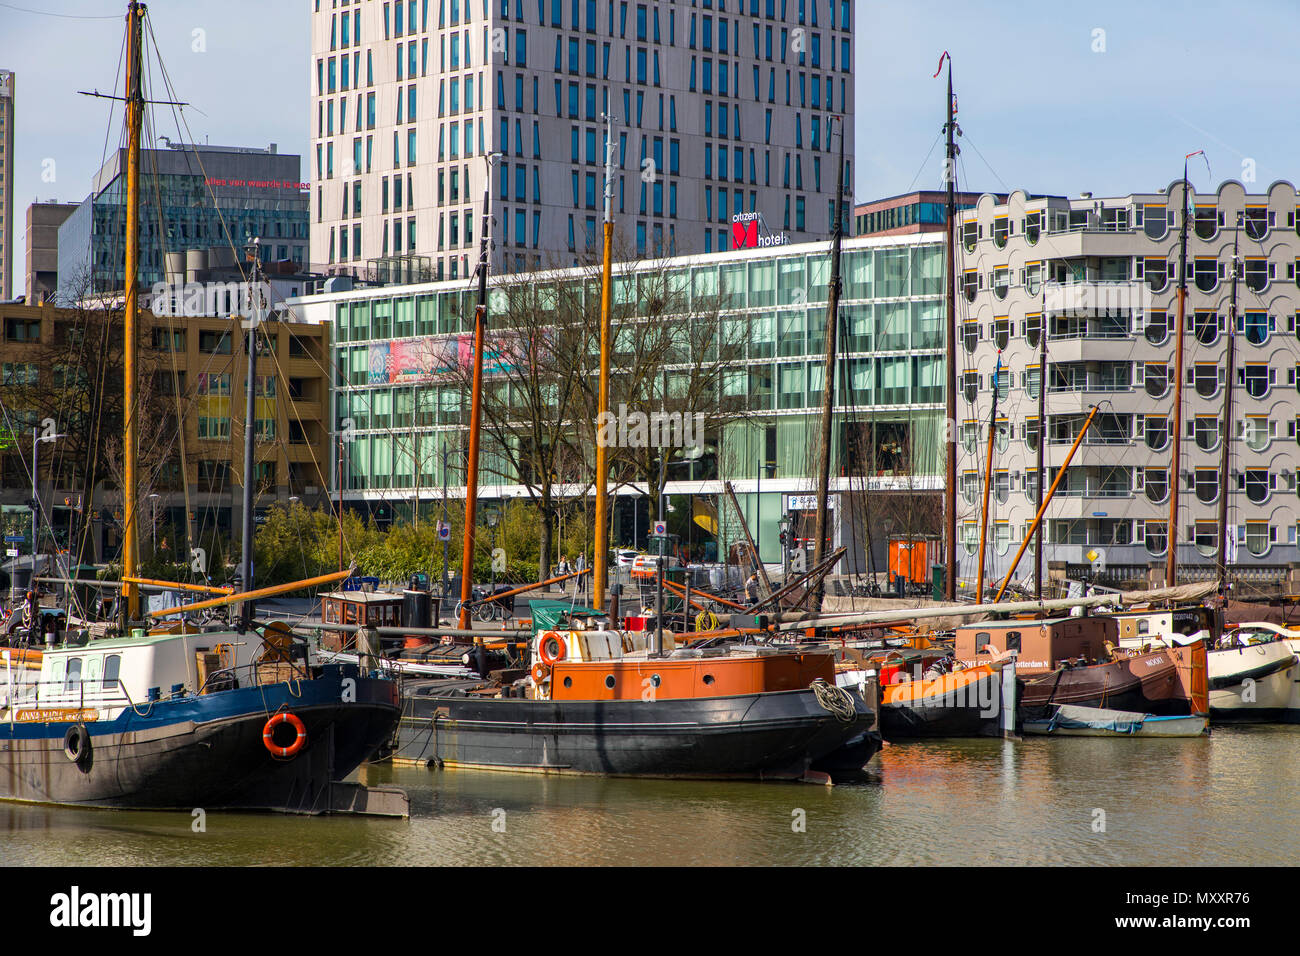 Downtown Rotterdam, Oude Haven, historic harbor, historic ships, Witte Huis, modern office buildings, skyscrapers, Netherlands, Stock Photo